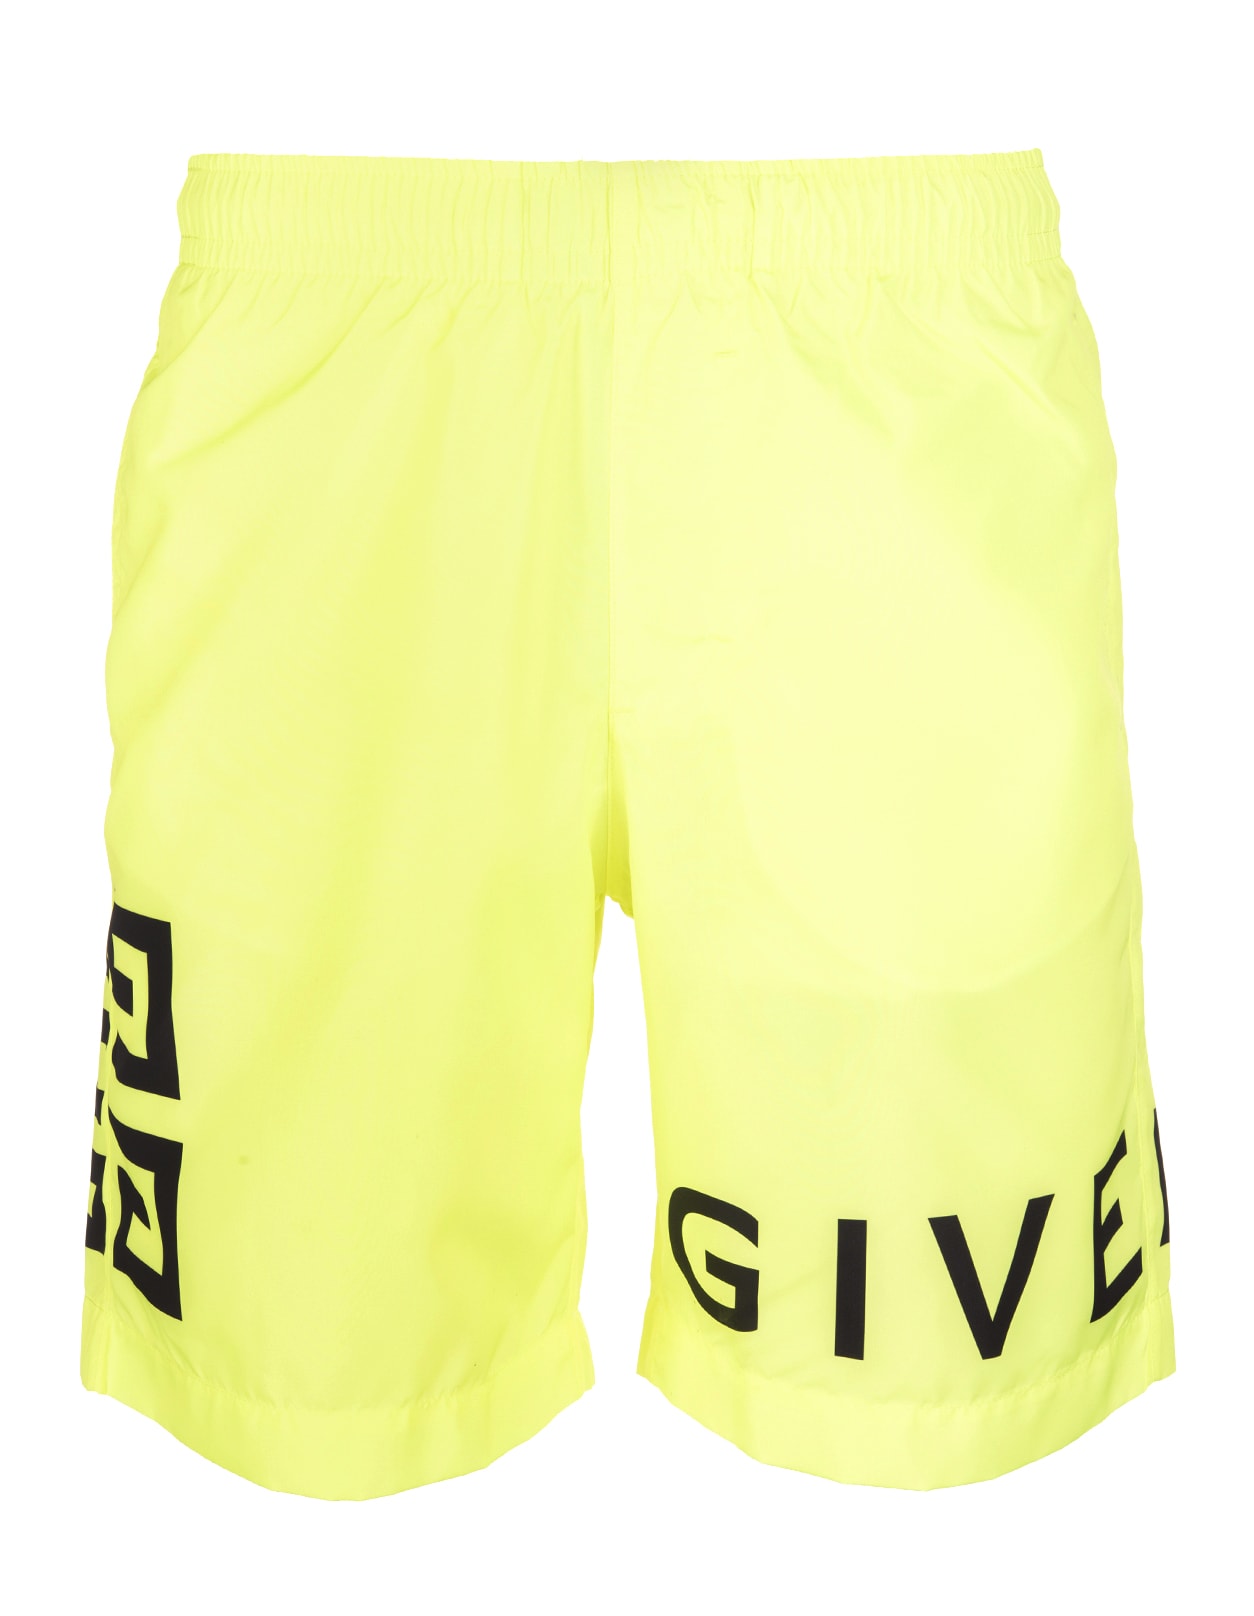 Givenchy 4g Long Fluo Yellow Swim Shorts